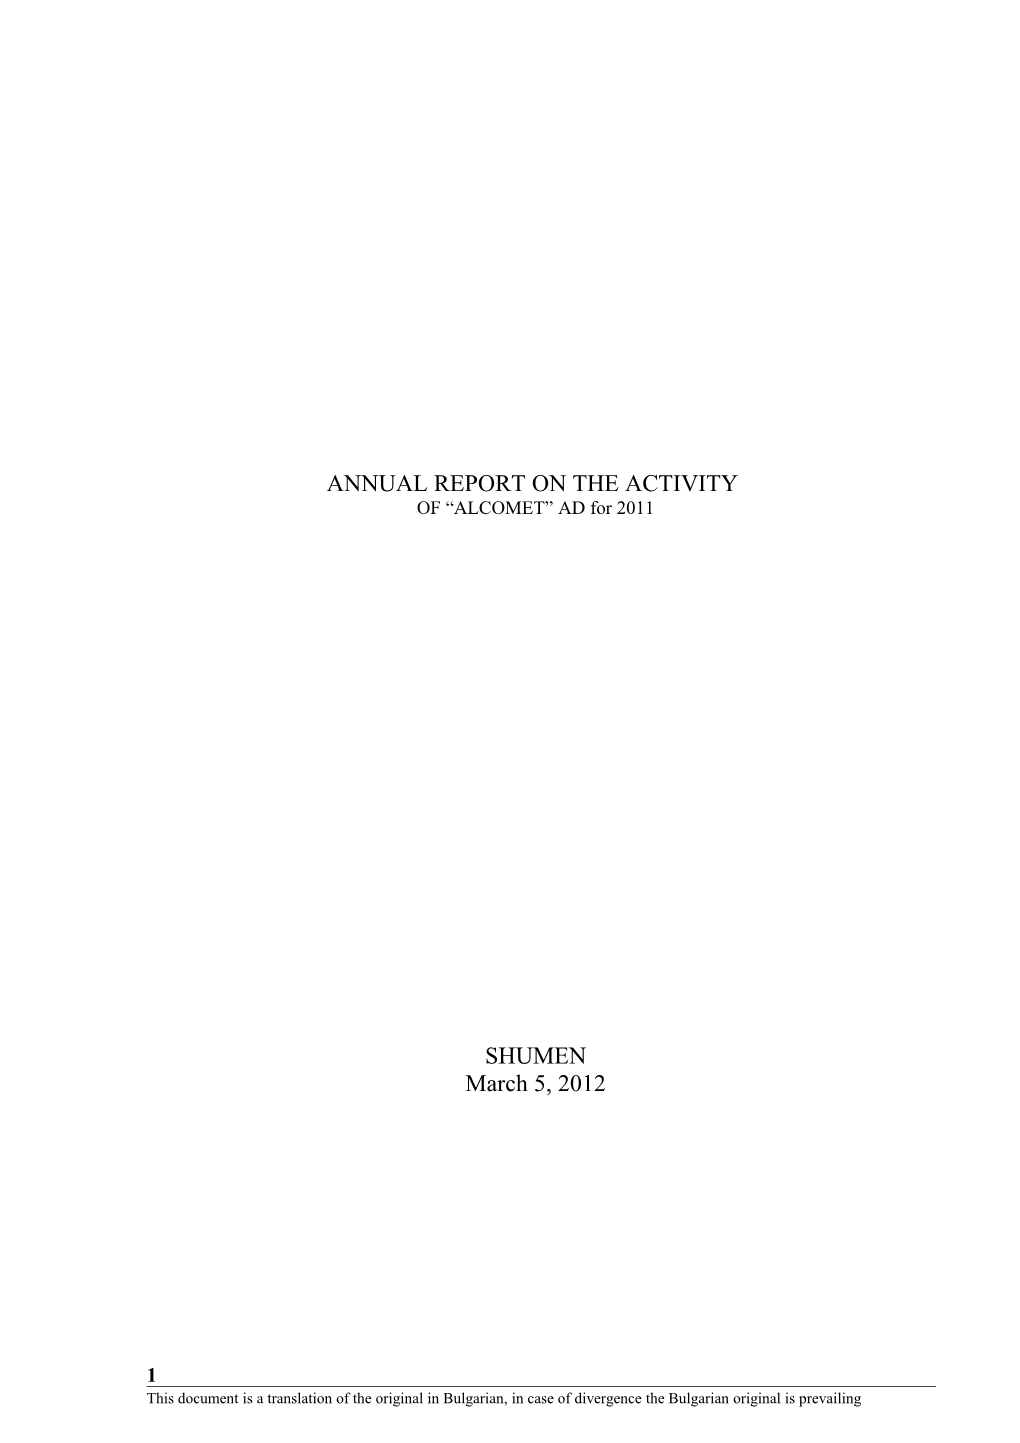 Annual Report on the Activity